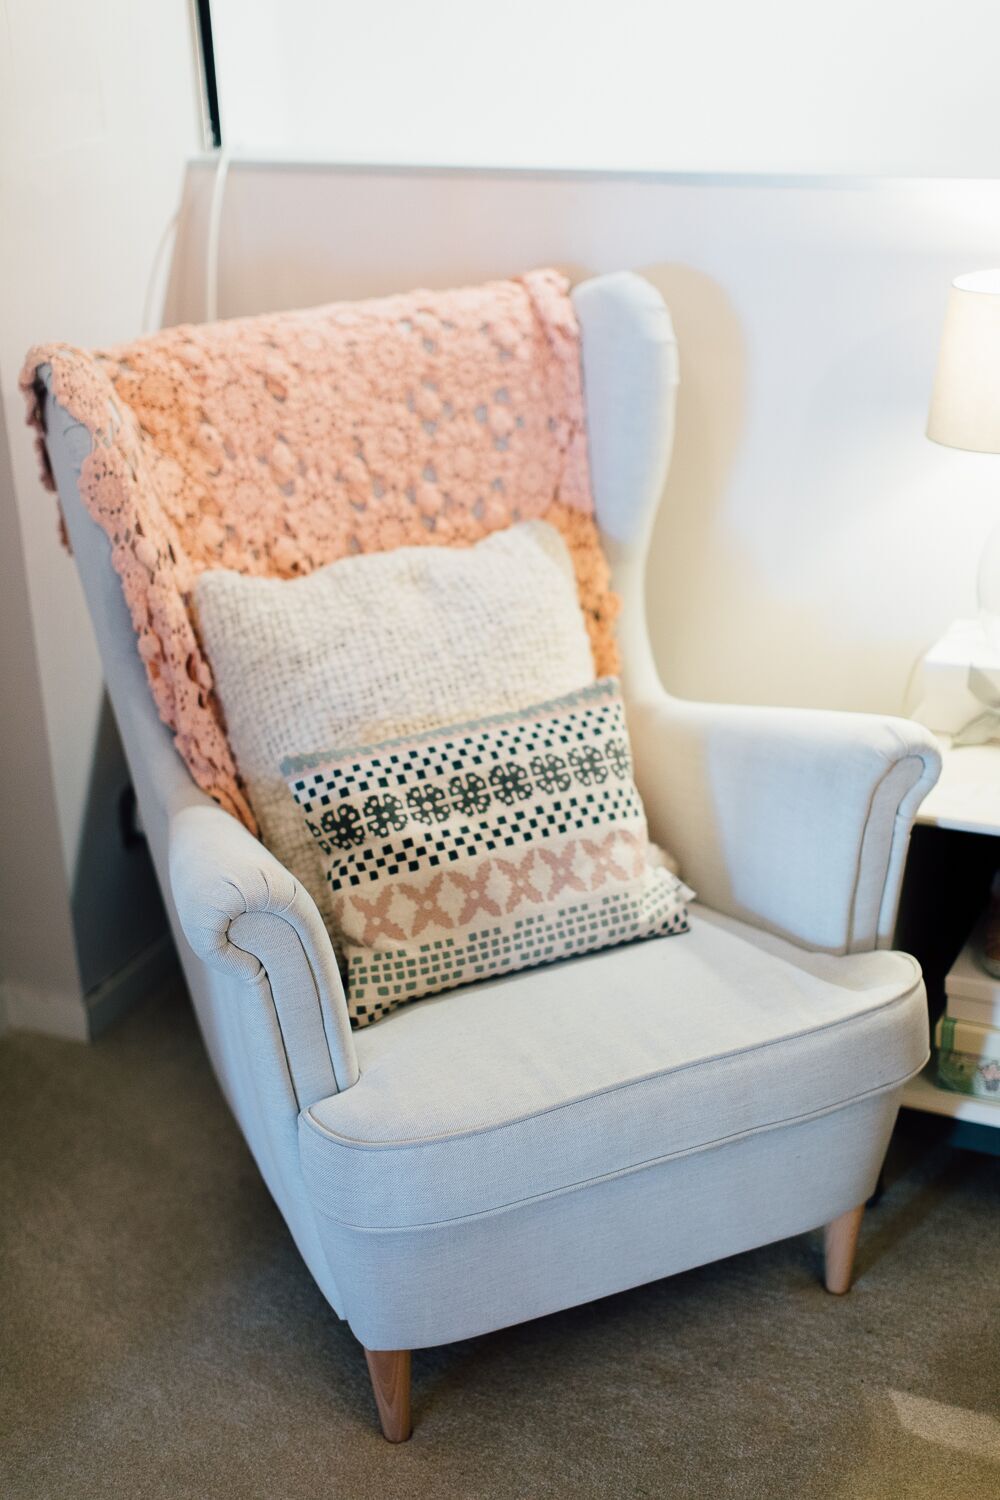 Grey nursing chair with pastel pink accessories